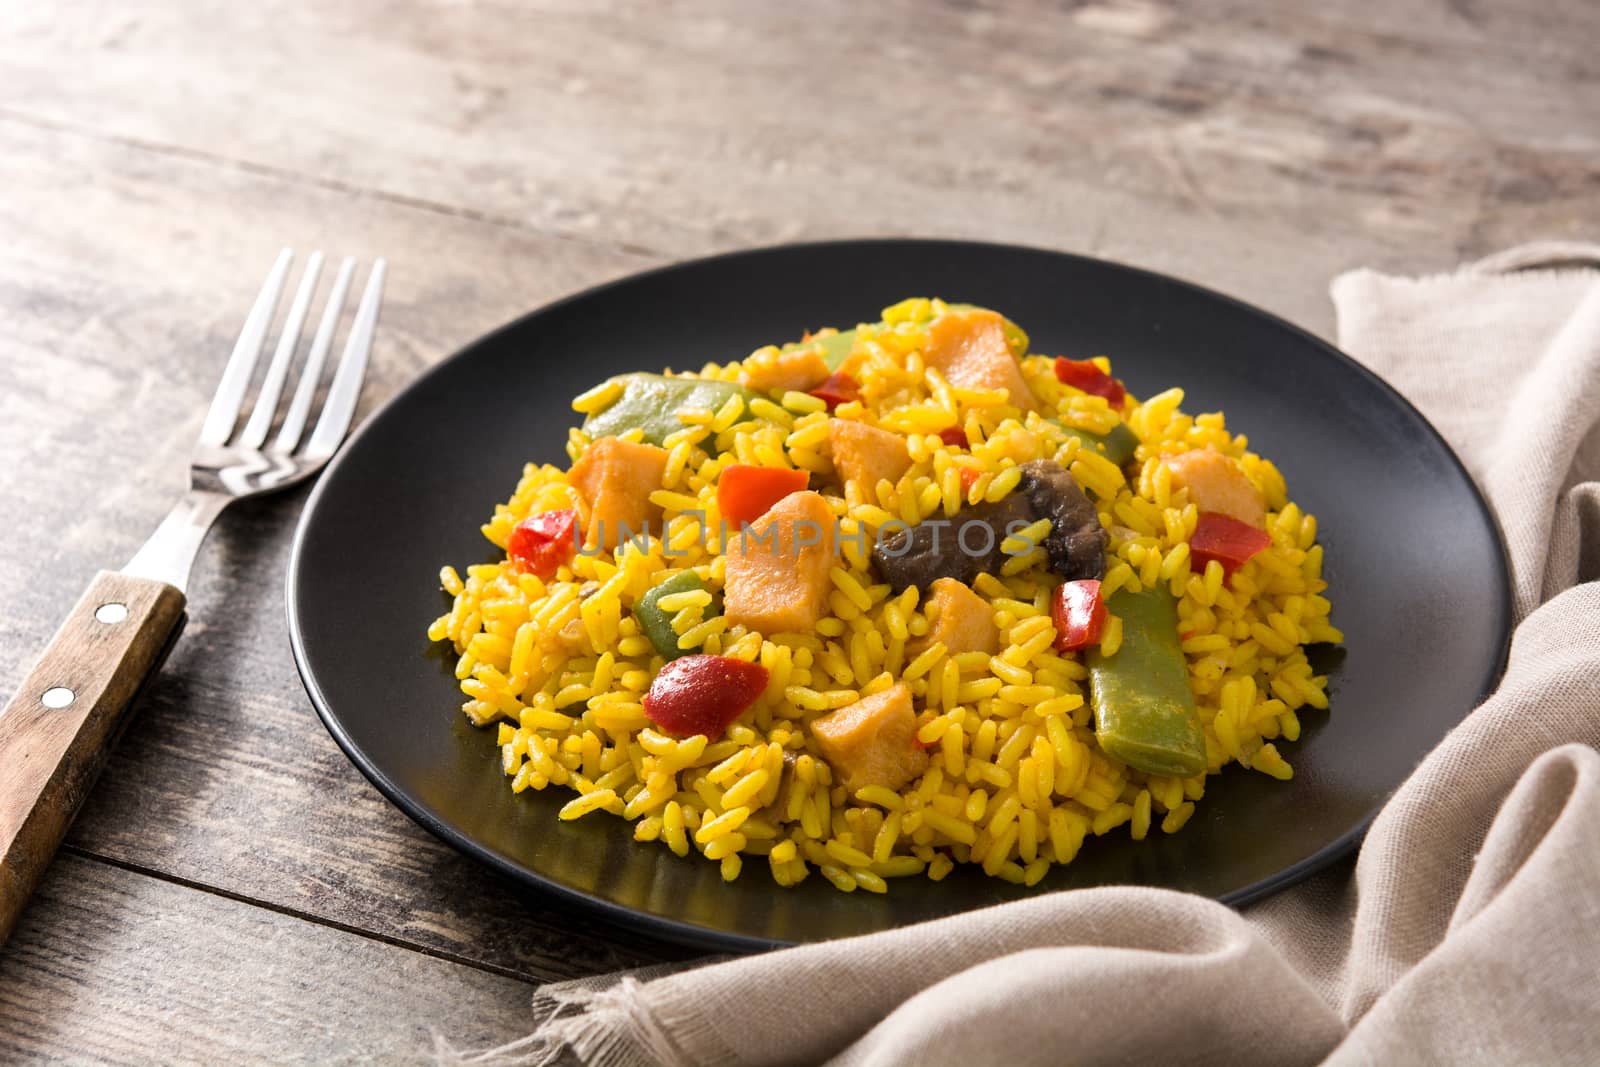 Fried rice with chicken and vegetables on black plate on wooden background